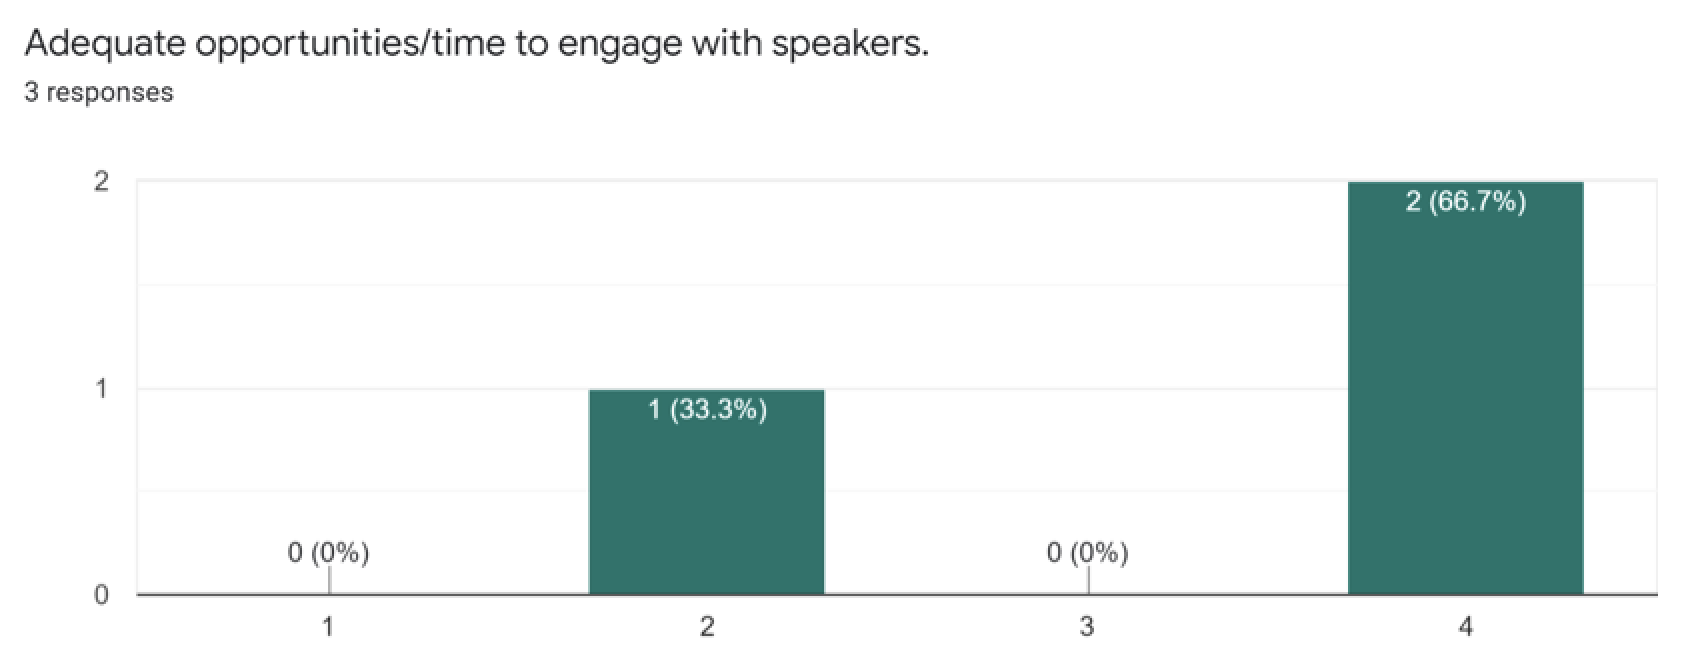 Figure 2e Adequate Opportunities, Time to Engage with Speakers